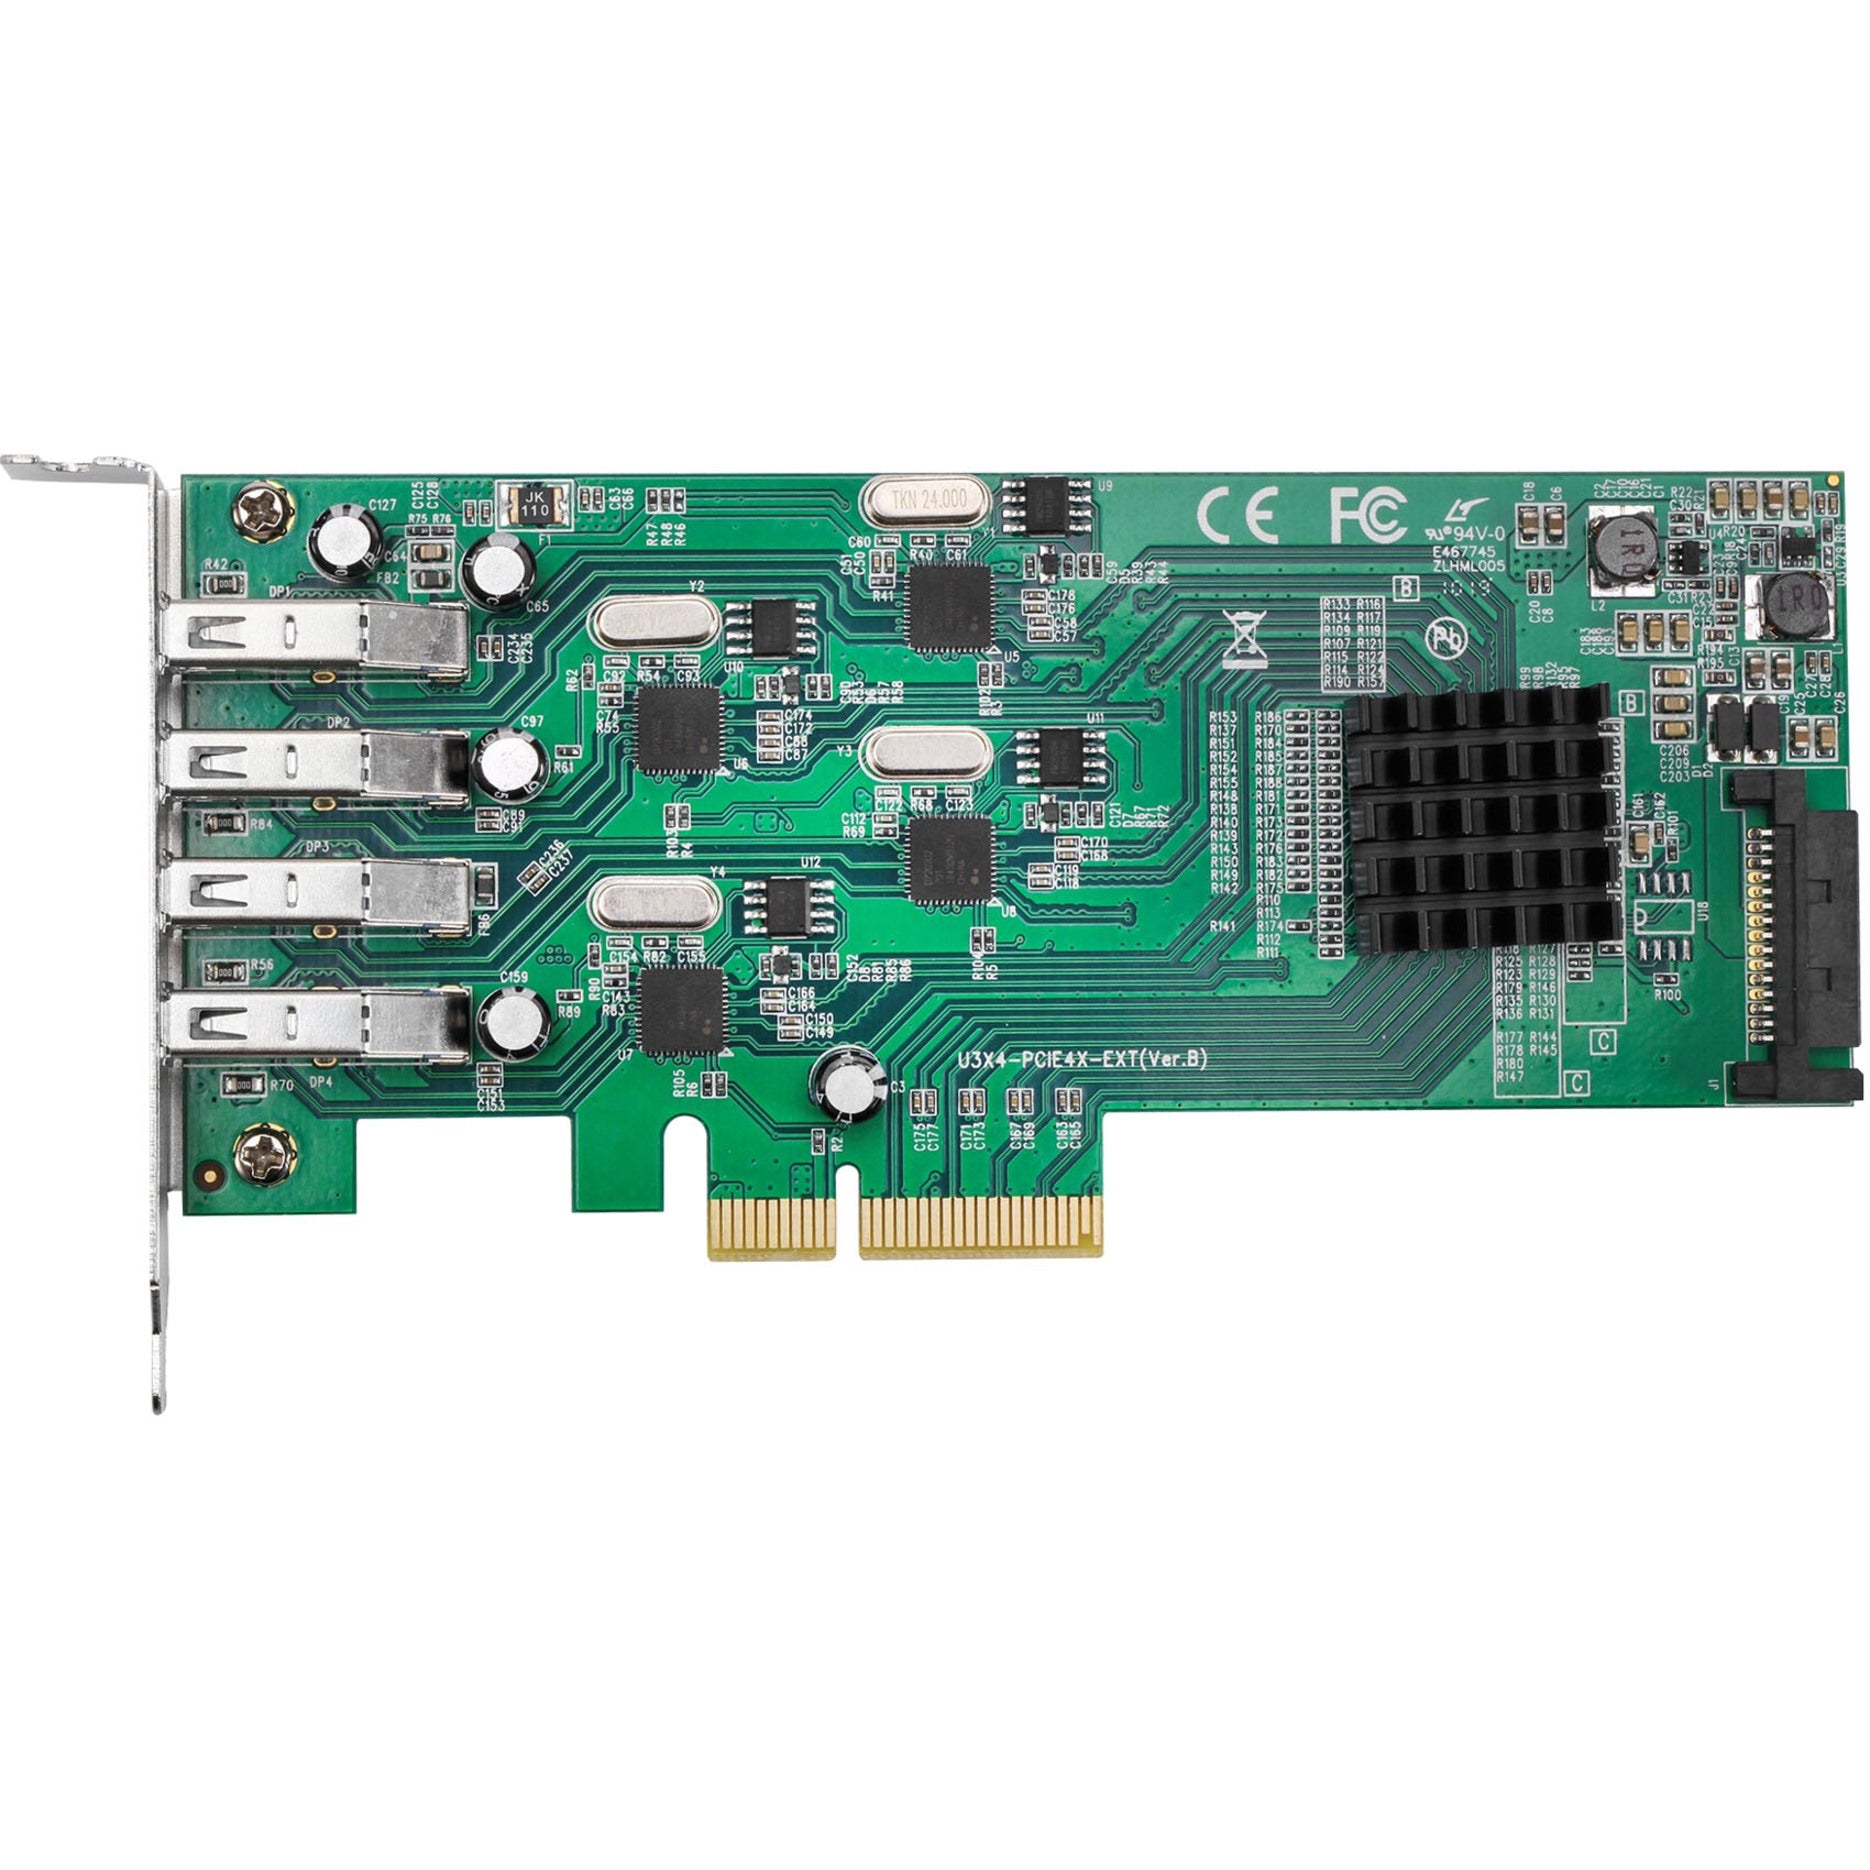 SIIG JU-P40811-S1 4-Port SuperSpeed USB 3.0 PCIe Card - Quad Core, 5Gbps Channels, UASP, Low Profile PCIe Adapter Card